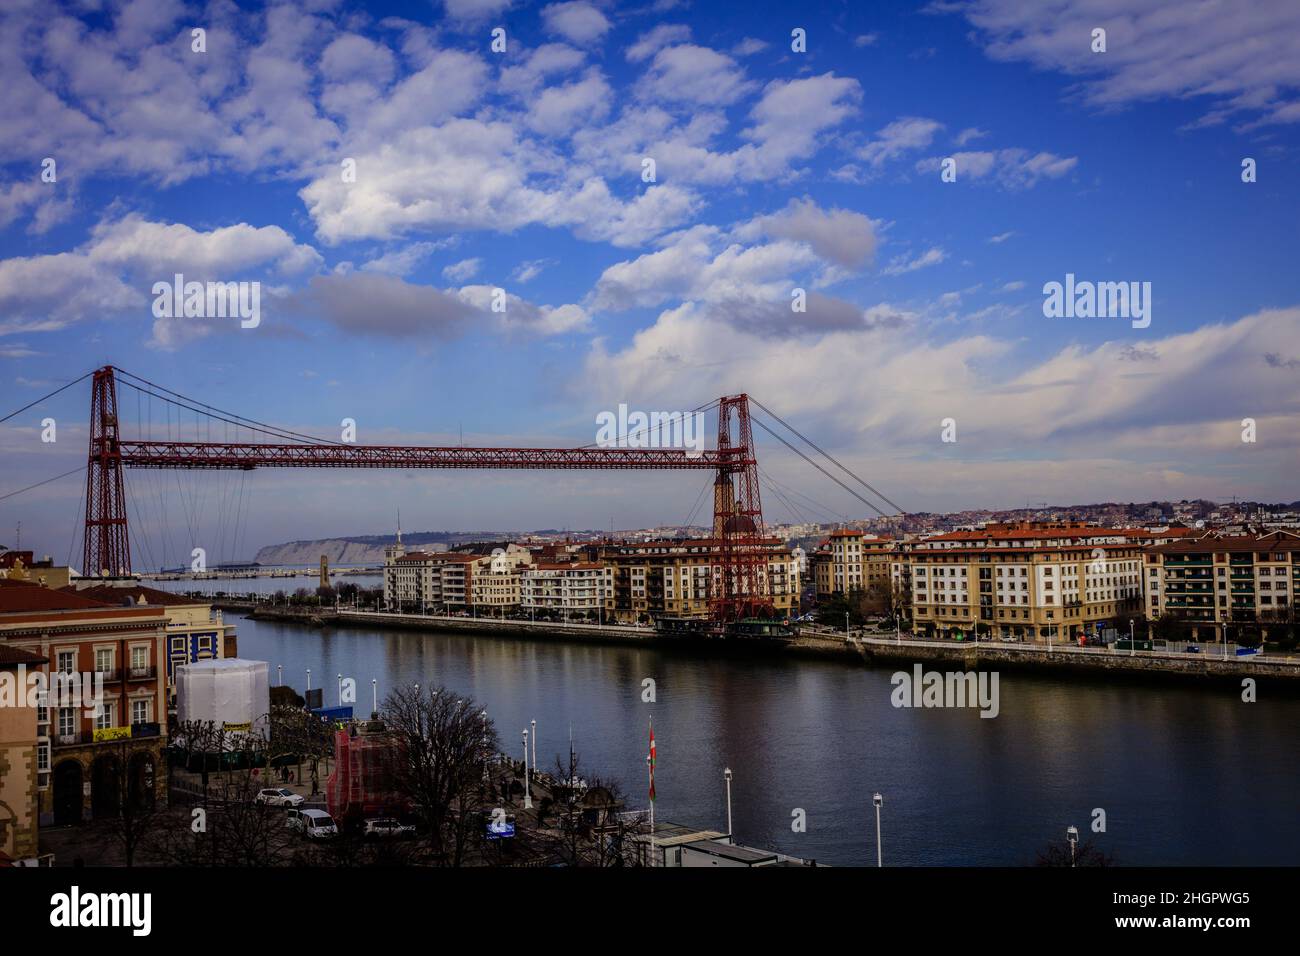 Vizcaya Bridge, Puente Colgante in Spanish, is a transporting bridge in the outskirts of Bilbao. It is a UNESCO World Heritage Site. Spain. Stock Photo